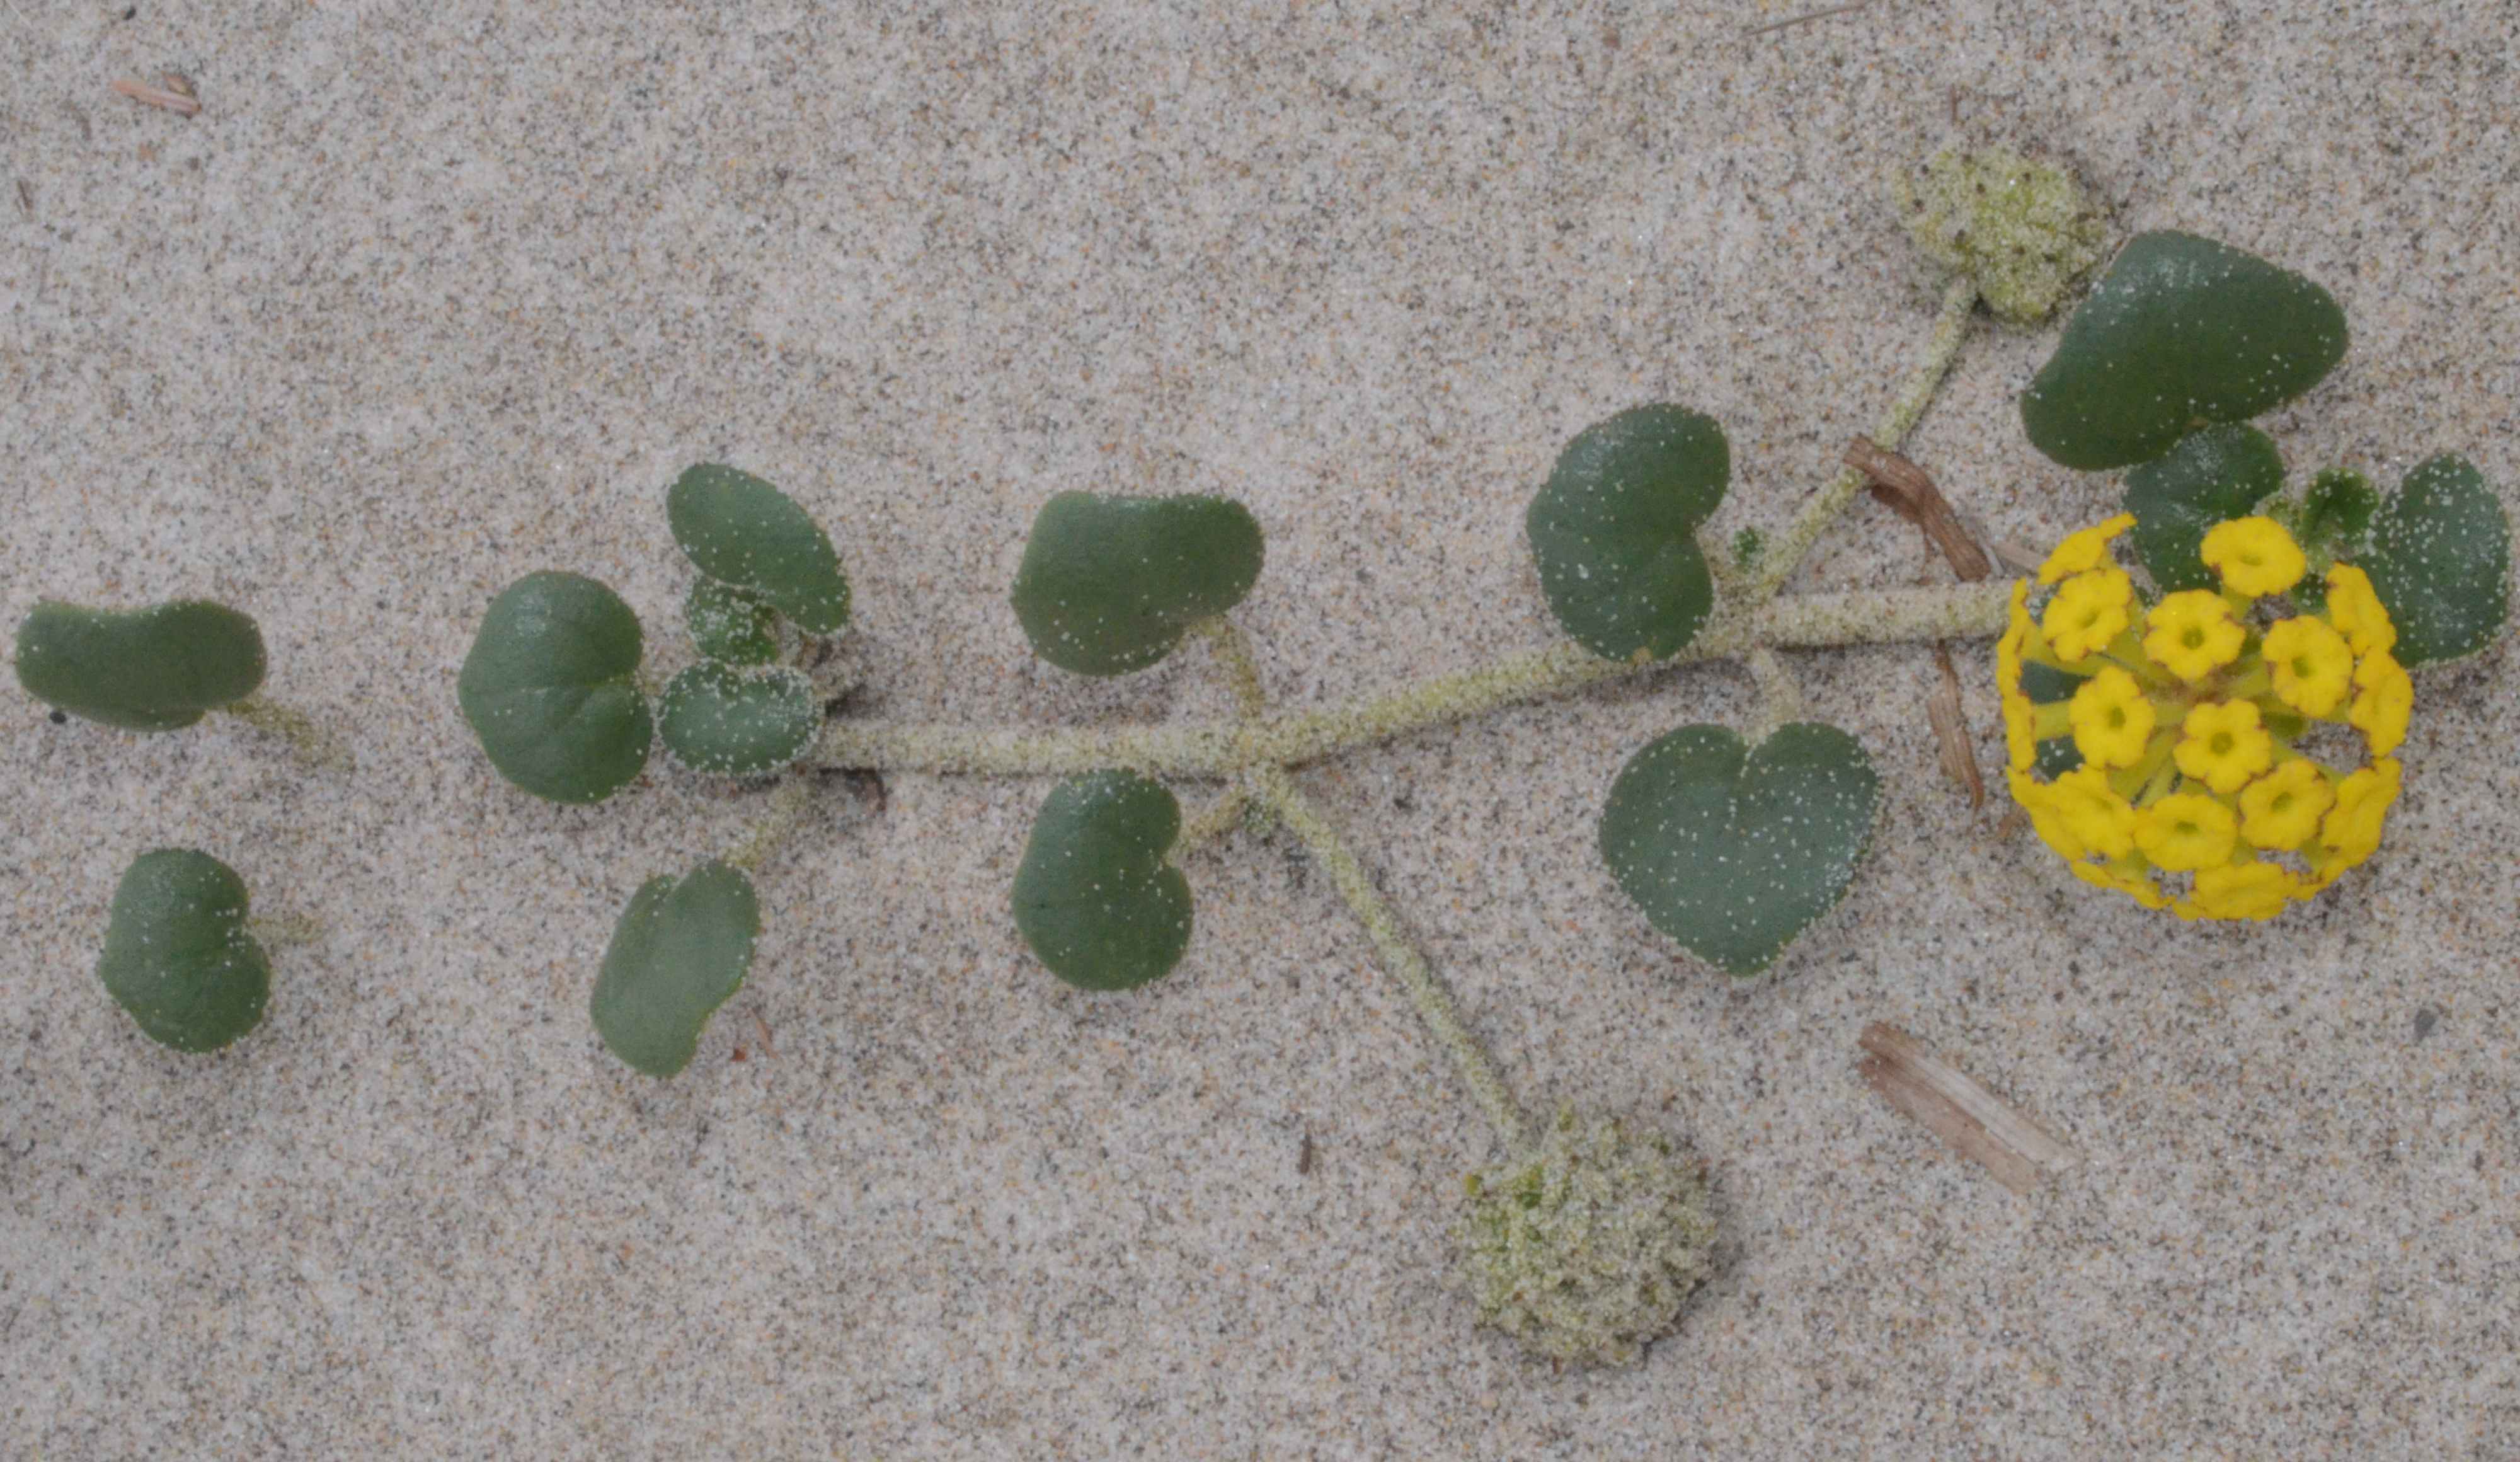 Abronia latifolia with flowers (yellow) and immature fruits (green and covered with sand).